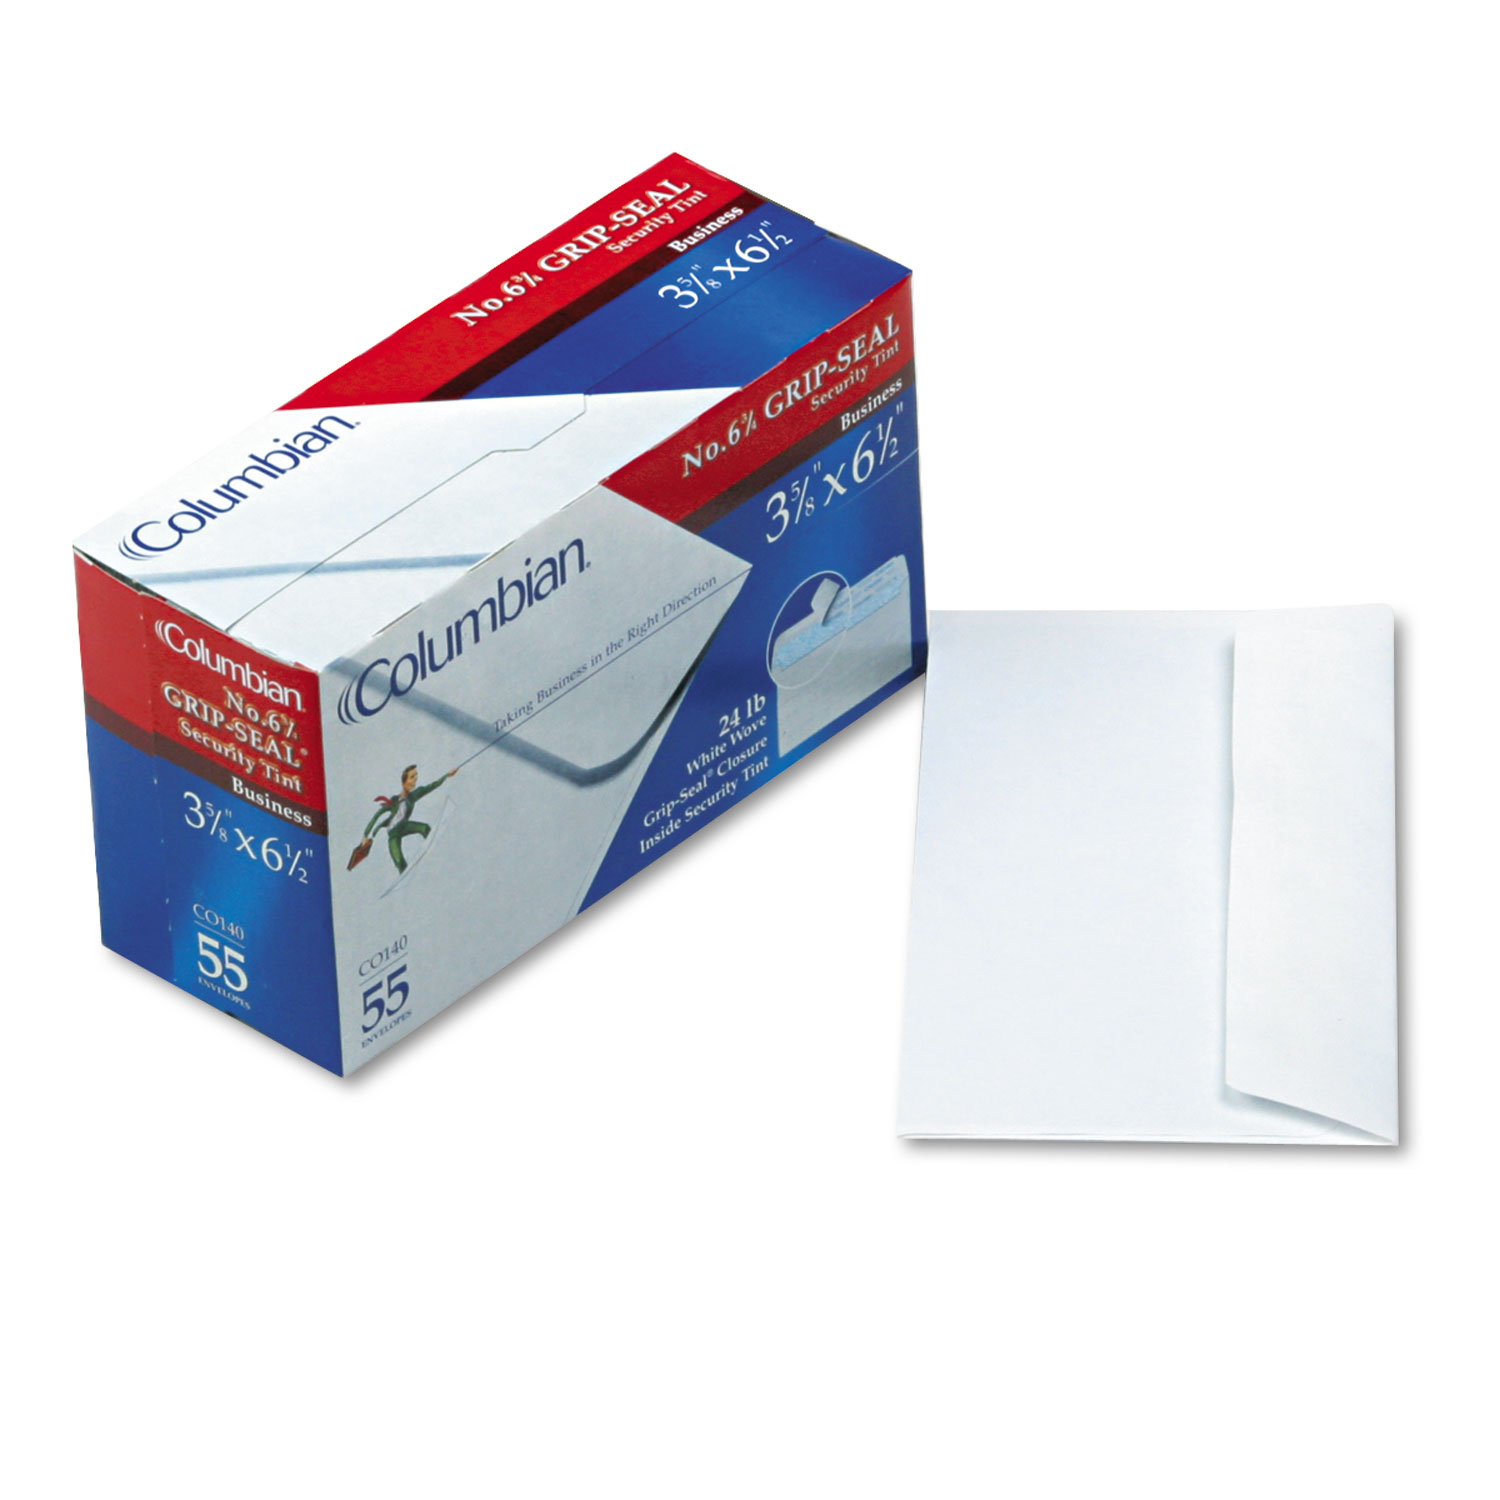  Columbian COLO140 Grip-Seal Business Envelope, #6 3/4, Commercial Flap, Self-Adhesive Closure, 3.63 x 6.5, White, 55/Box (QUACO140) 